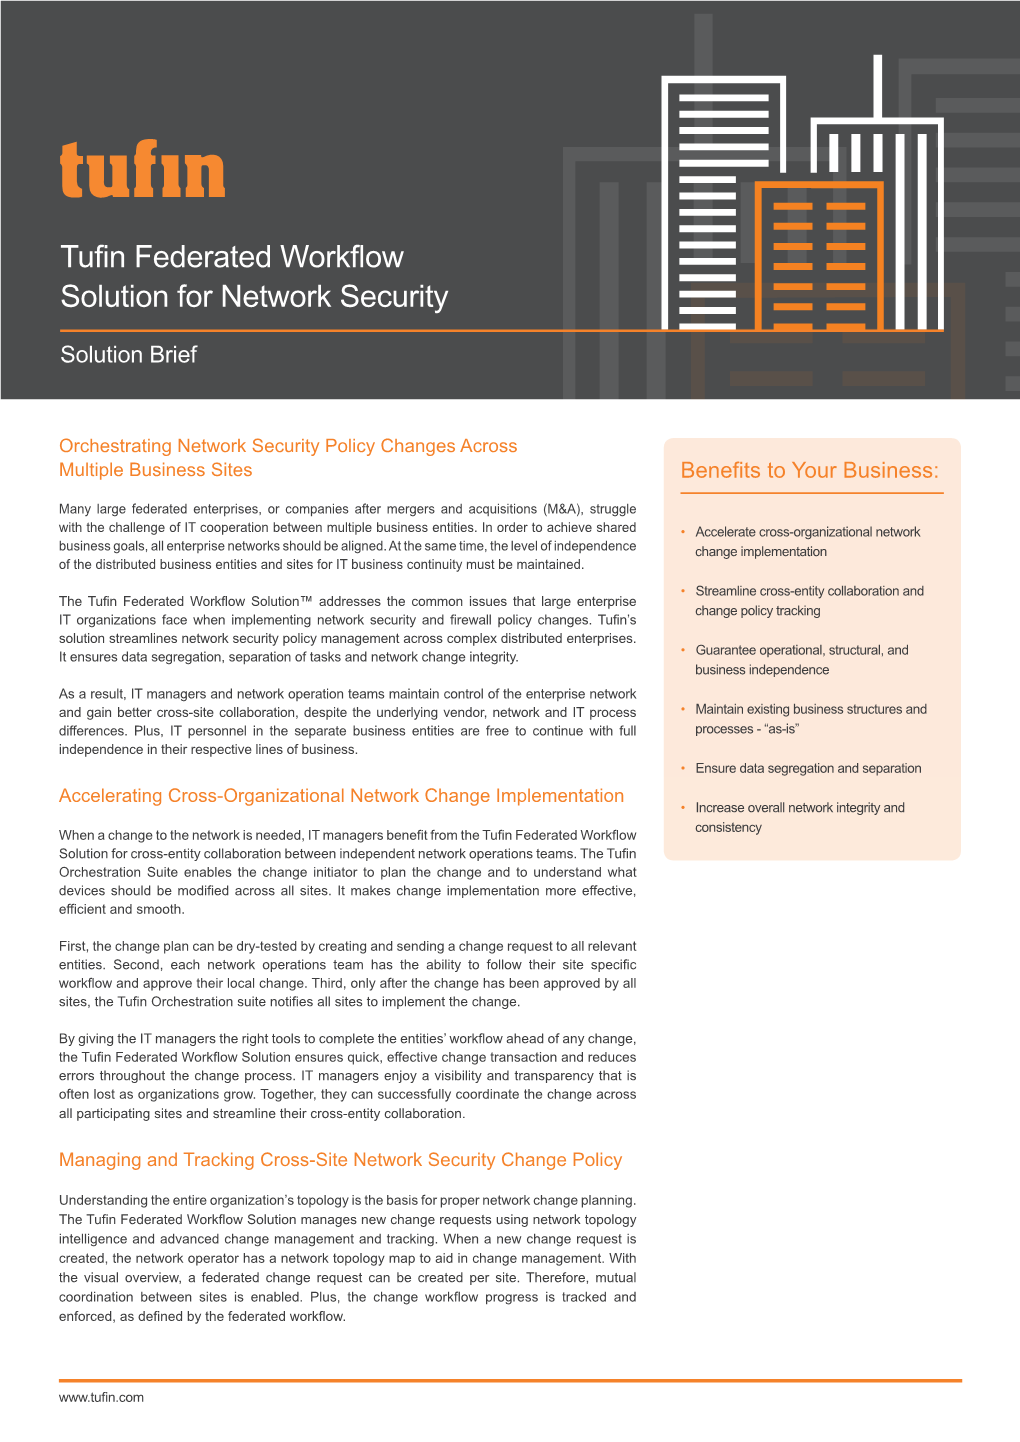 Tufin Federated Workflow Solution for Network Security